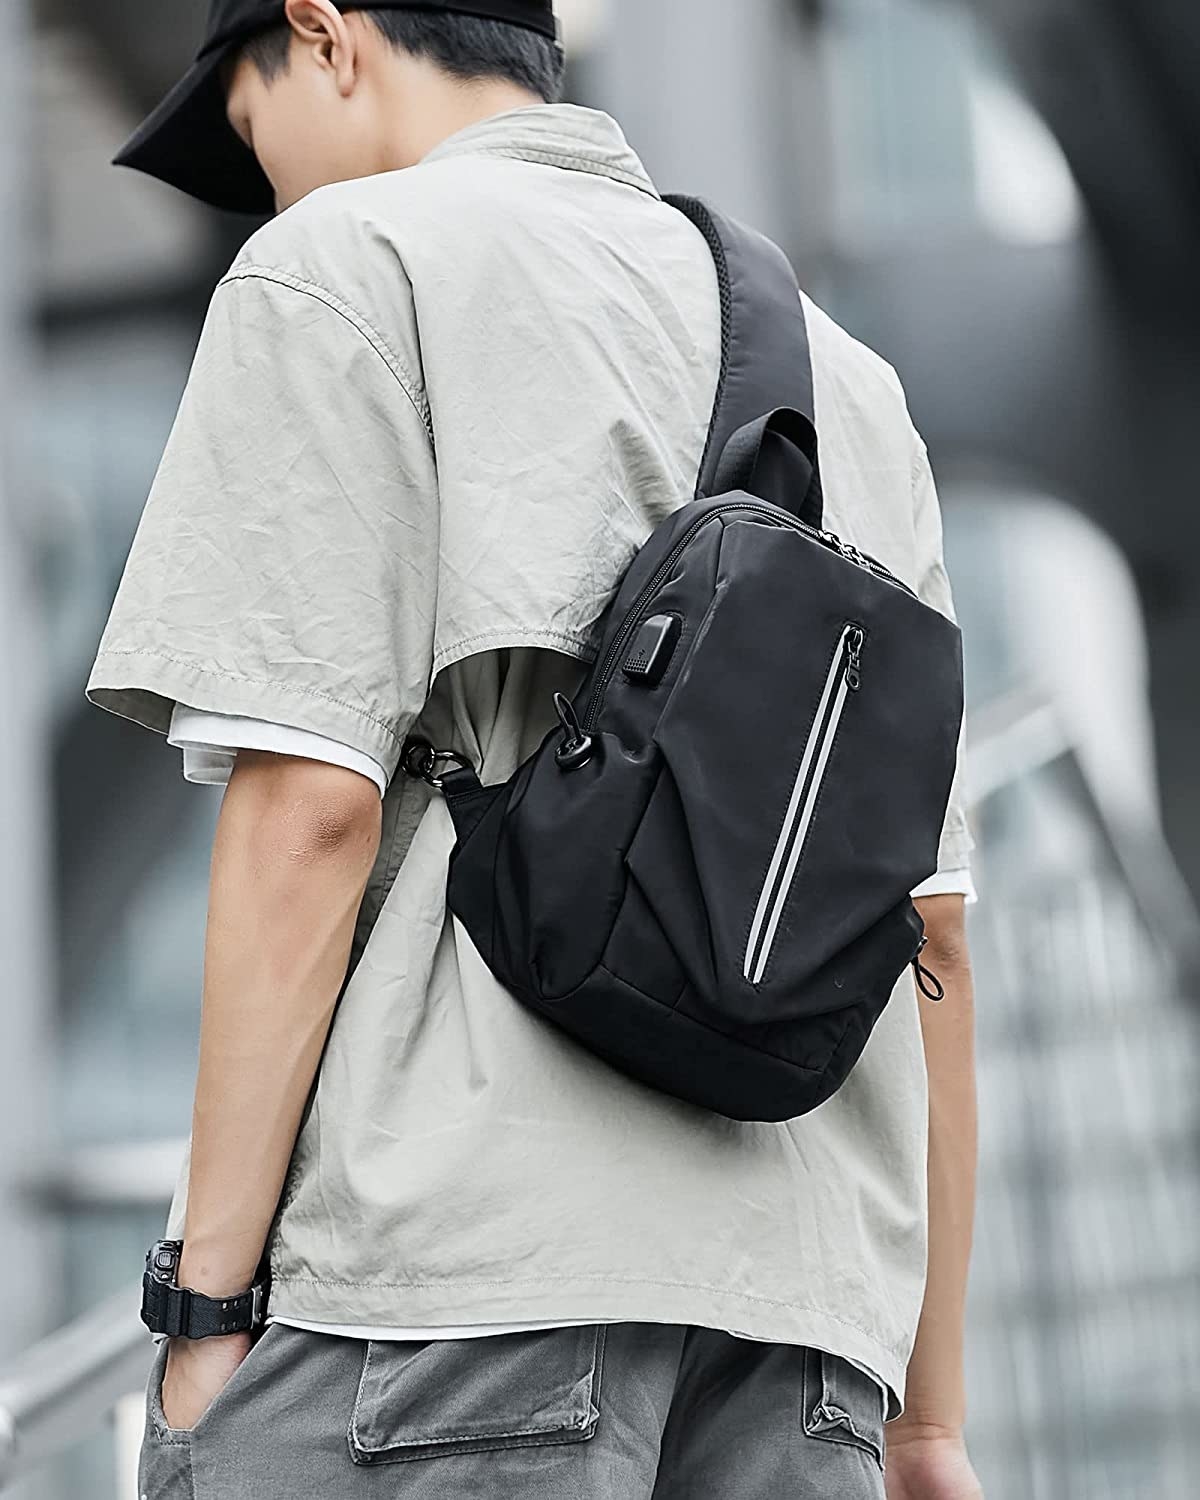 A person wearing the messenger bag on their back